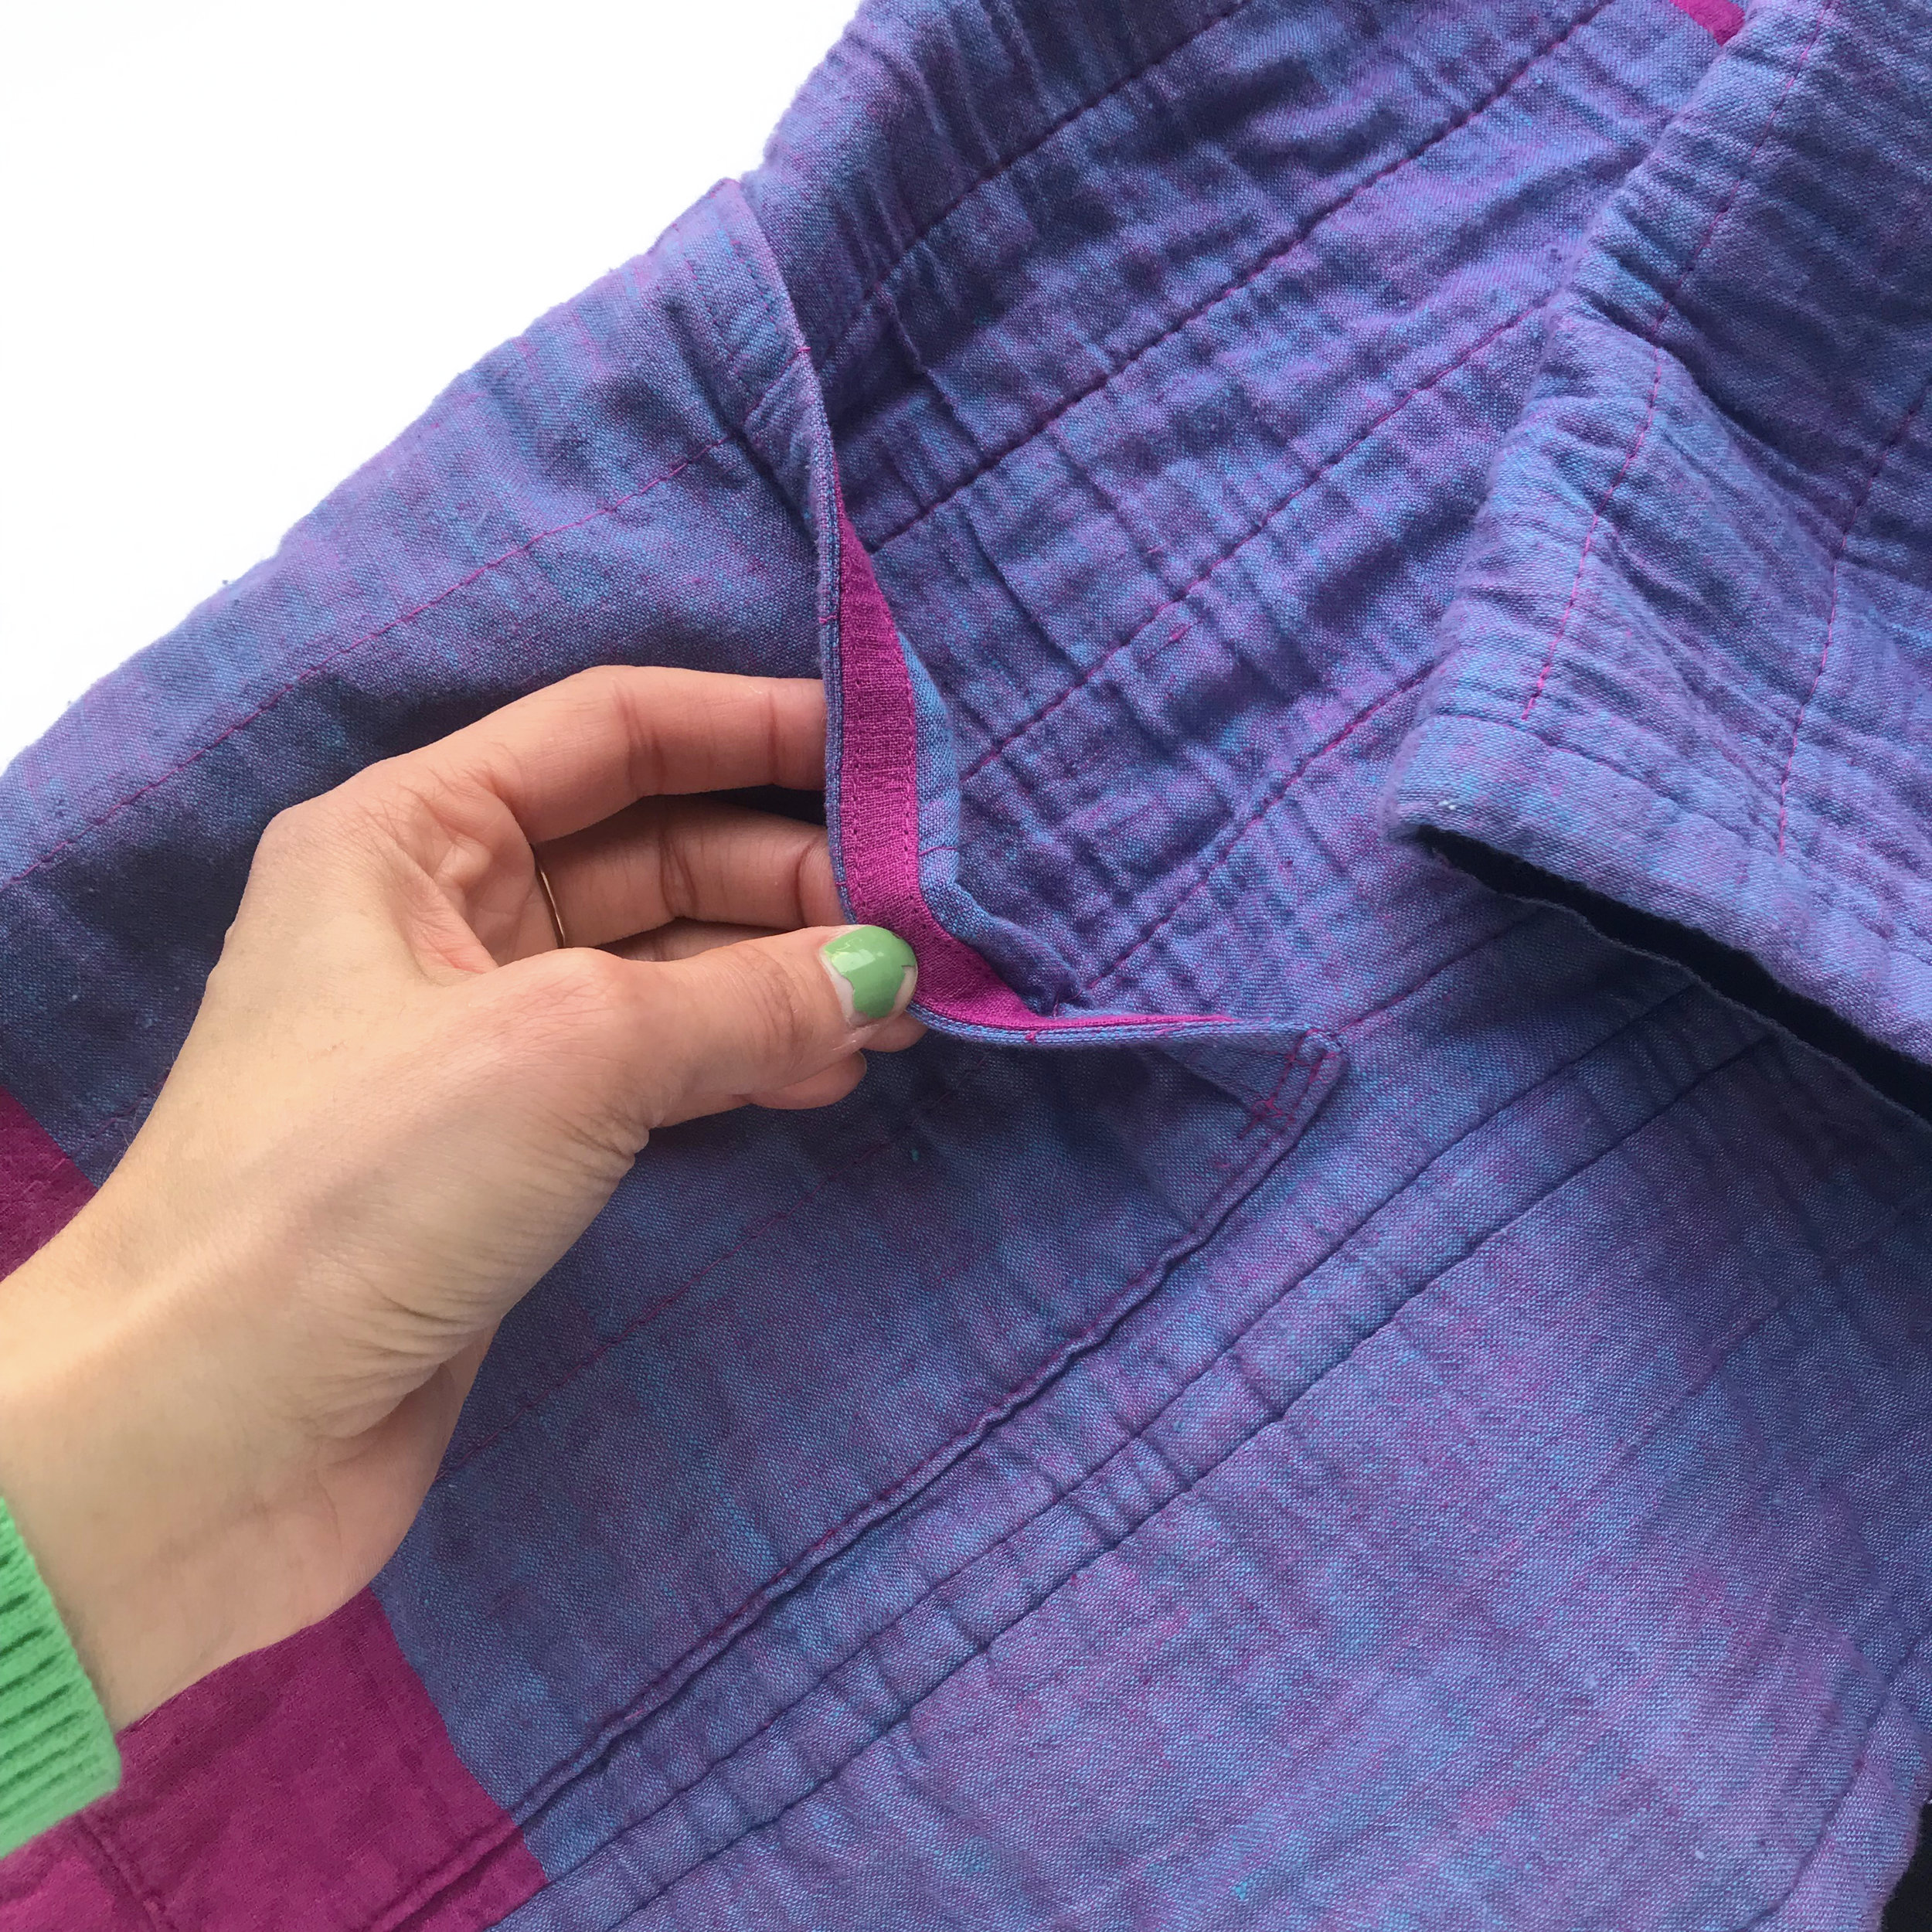  Here you can see how I reinforced the top edge of the pocket. I wrapped stable twill tape in self fabric and edge stitched both edges along the top of the pocket. 